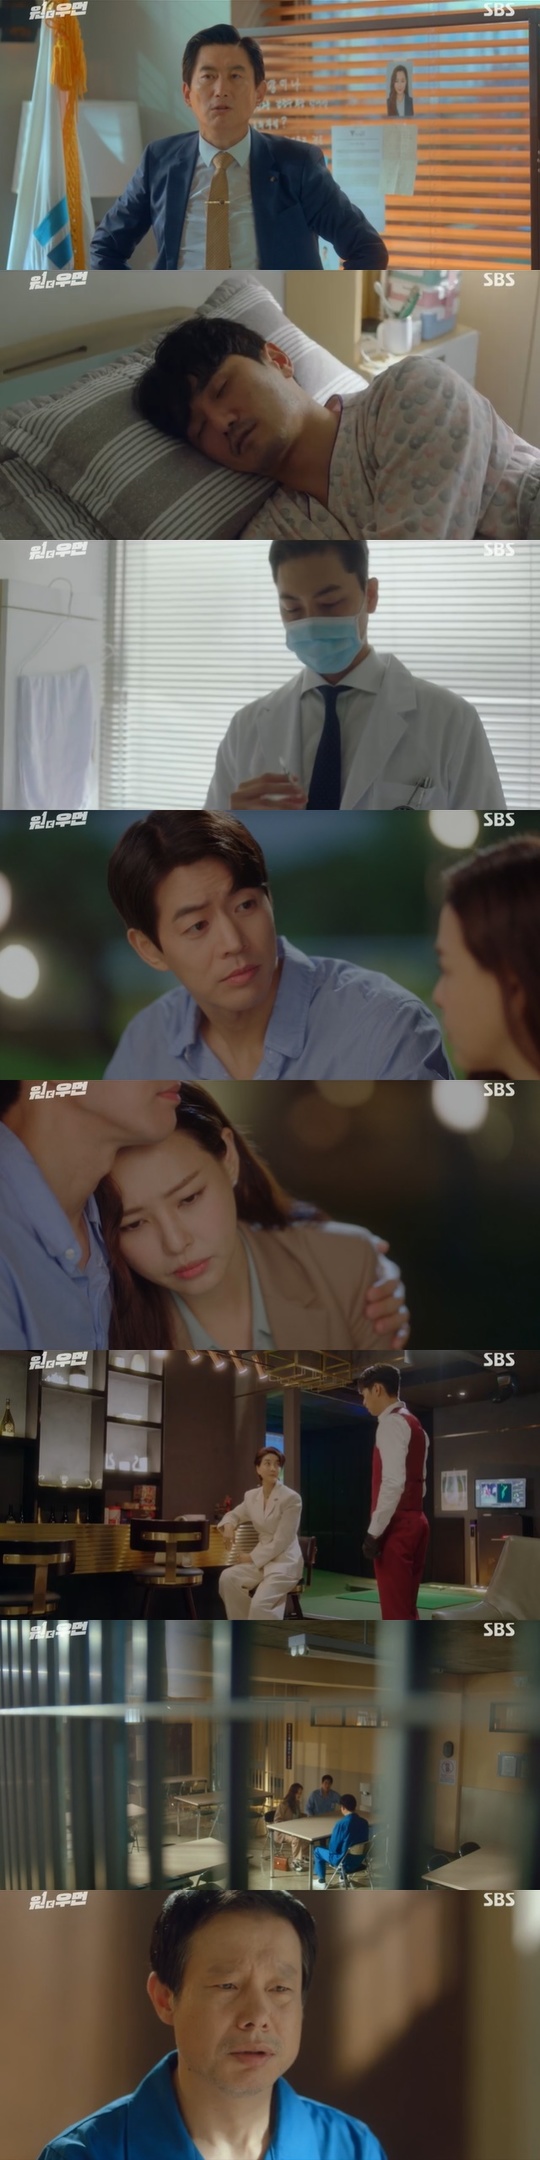 Lee Ha-nui was shocked to learn the truth his father wrote an arson An Innocent Man for him.In the 11th episode of SBS gilt drama one the woman (played by Kim Yoon and directed by Choi Young-hoon), which was broadcast on October 22, the figure of a supporting actor (Lee Ha-nui) who continues to struggle to reveal the corruption of Hanju was drawn.On this day, Cho Yeon-ju and Han Seung-wook (Lee Sang-yoon) were in crisis due to the securities company Chirashi, which was first circulated by Park So-i (Park Jung-hwa).Park So-i shed the fake problem of the supporting actor in order to trample han seung-wook (Song Won-seok) with his wings due to his supporting actor.Han Sung-hye (Jin Seo-yeon) reached out to Park So-i.Han Sung-hye also visited Kang Minas aunt Kang Eun-hwa (played by Hwang Young-hee) and said, It is the shape of a securities company Chirashi, who says that Olkeh is a fake.In the meantime, the number of people who doubt and guess the identity of Cho Yeon-ju increased one by one.First, Ryu Seung-deok (Kim Won-hae) met a person who met at a luxury goods store when Cho Yeon-ju was posing as Kang Mina, and questioned the fact that Cho Yeon-ju was at a luxury goods store when she said she had a vacation.On the other hand, Han Sung-hyes secretary, Jung Do-woo (Kim Bong-man), learned about Kang Minas smuggling and heard the clue of the supporting actor Identity from the three-way wave.han seung-wook appealed to the supporting actor who returned home, saying, You and I are a co-destiny, and said, I have no intention of divorceing anyone whoever you do.Youre not Kang Mina. Your name, your age, I know that much. I didnt care more about the real Kang Mina. I dont care.I just need you now, he said, revealing that he knows the identity of the supporting actor.But Han Seong-uns Blackmail – Cinémix Par Chloé didnt work with the supporting cast.The supporting actor said, So you have to keep playing Kang Mina to keep the position, but if I do not need it?If you tell me Im not Kang Mina, youll fly right from there. No matter what happens to me, youre incapable of protecting your wifes legacy.Then shut up for you and protect me now, not for me. han seung-wook shrank again and left.In the meantime, Jang Seok-ho, who had bought a supporting actor earlier, woke up.Han Sung-hye ordered the treatment as soon as he was reported, and Han Seung-wook and Cho Yeon-ju visited the hospital directly.However, Jang Seok-ho denied the intention of the accident on the pretext of epilepsy obtained from a fire accident at a factory in Hanju.Instead, Jang Seok-ho showed up asking Han Sung-hyes secretary, Jung Woo, to meet him alone.Ryu Seung-deok was informed of the current situation of the supporting actor. Ryu Seung-deok noticed the two-person role compared to the performance of Kang Mina.Kang Mina or a supporting actor , and I was convinced that 100% supporting actor is one person and two roles in the attitude of a supporting actor full of anger.Ryu Seung-deok tried to revisit his identity statement during Cho Yeon-jus appointment to Inspection.Ahn Yoo-joon (Lee Won-geun) found out all the important things related to Lee Bong-sik (Kim Jae-young) after the house incubation.Lee Bong-sik has always bragged that he has hidden a huge thing in the pawn shop in front of the house to the people who were gambling together.In addition, Ahn Yoo-joon also handed over information that there seems to be a person carrying this USB in the triangular group, and Cho asked Wang Pil-gyu (Lee Kyu-bok) and Choi Dae-chi (Jo Dal-hwan) to come to him.But USB had already been in someones hands.Han Sung-hyes secretary, Jung Do-u, was discovered by Han Seung-wook while performing the Jang Seak-ho treatment.Han Seung-wook hurriedly chased Jung Do-u, who was running away to give the shot, but could not catch him.Meanwhile, the supporting actor stumbled upon the three-way wave that had fought in the past and captured the USB in his hand, which he fought to disguise as a chicken mask and take away, but he could not take it away.Jang Seok-ho, who died, told the truth to Han Seung-wook, Cho Yeon-ju, belatedly.Jang Seak-ho said, He told me to do a job because he would give me a case. My wife said she would have a job at the hotel that day.If he gives you a signal while you wait, you can take her. But she suddenly appeared without a signal.I started as I thought things should not go wrong, but I was nervous and suddenly I had a seizure. He also told another shocking truth: I was paid for testifying fakely in the past weeks factory fire, said Jang Seok-ho. I saw someone burning.Im sorry, too. He was in every room in the dorm, and the announcement allowed the entire factory to evacuate.I drank smoke and my epilepsy got worse, but if he did not wake up, he would have died.I did not lie to him, but he admitted that he had set fire, and Cho was shocked to find out that this was the truth about Kang Myung-guk (Jung In-ki).Han seung-wook tenderly soothed the regrettable supporting actor.Han Sung-hye attacked the attack. Han Sung-hye visited han seung-wook and said, There is no meeting tomorrow morning.The pills I gave you, sometimes you dont sleep. Theyre unusual. Inspection is the brain. And youre not free.I will release all the videos I have taken after making Chirashi. Han Sung-hye also made han seung-wook as the eldest son of the Hanju group, Blackmail - Cinémix Par Chloé.Han Sung-hye showed a recorder to han seung-wook, who believes in the supporting actor and shows a dignified attitude, saying, You know it, its your wifes fake.Previously, Han Sung-hye set up a secret recorder in the supporting actors room, and recorded all the conversations between han seung-wook and the supporting actor.Han Sung-hye, who has taken care of the hair of the supporting actor naturally, has completed the genetic inspection. Han Sung-hye said, You have no choice.Who is she?